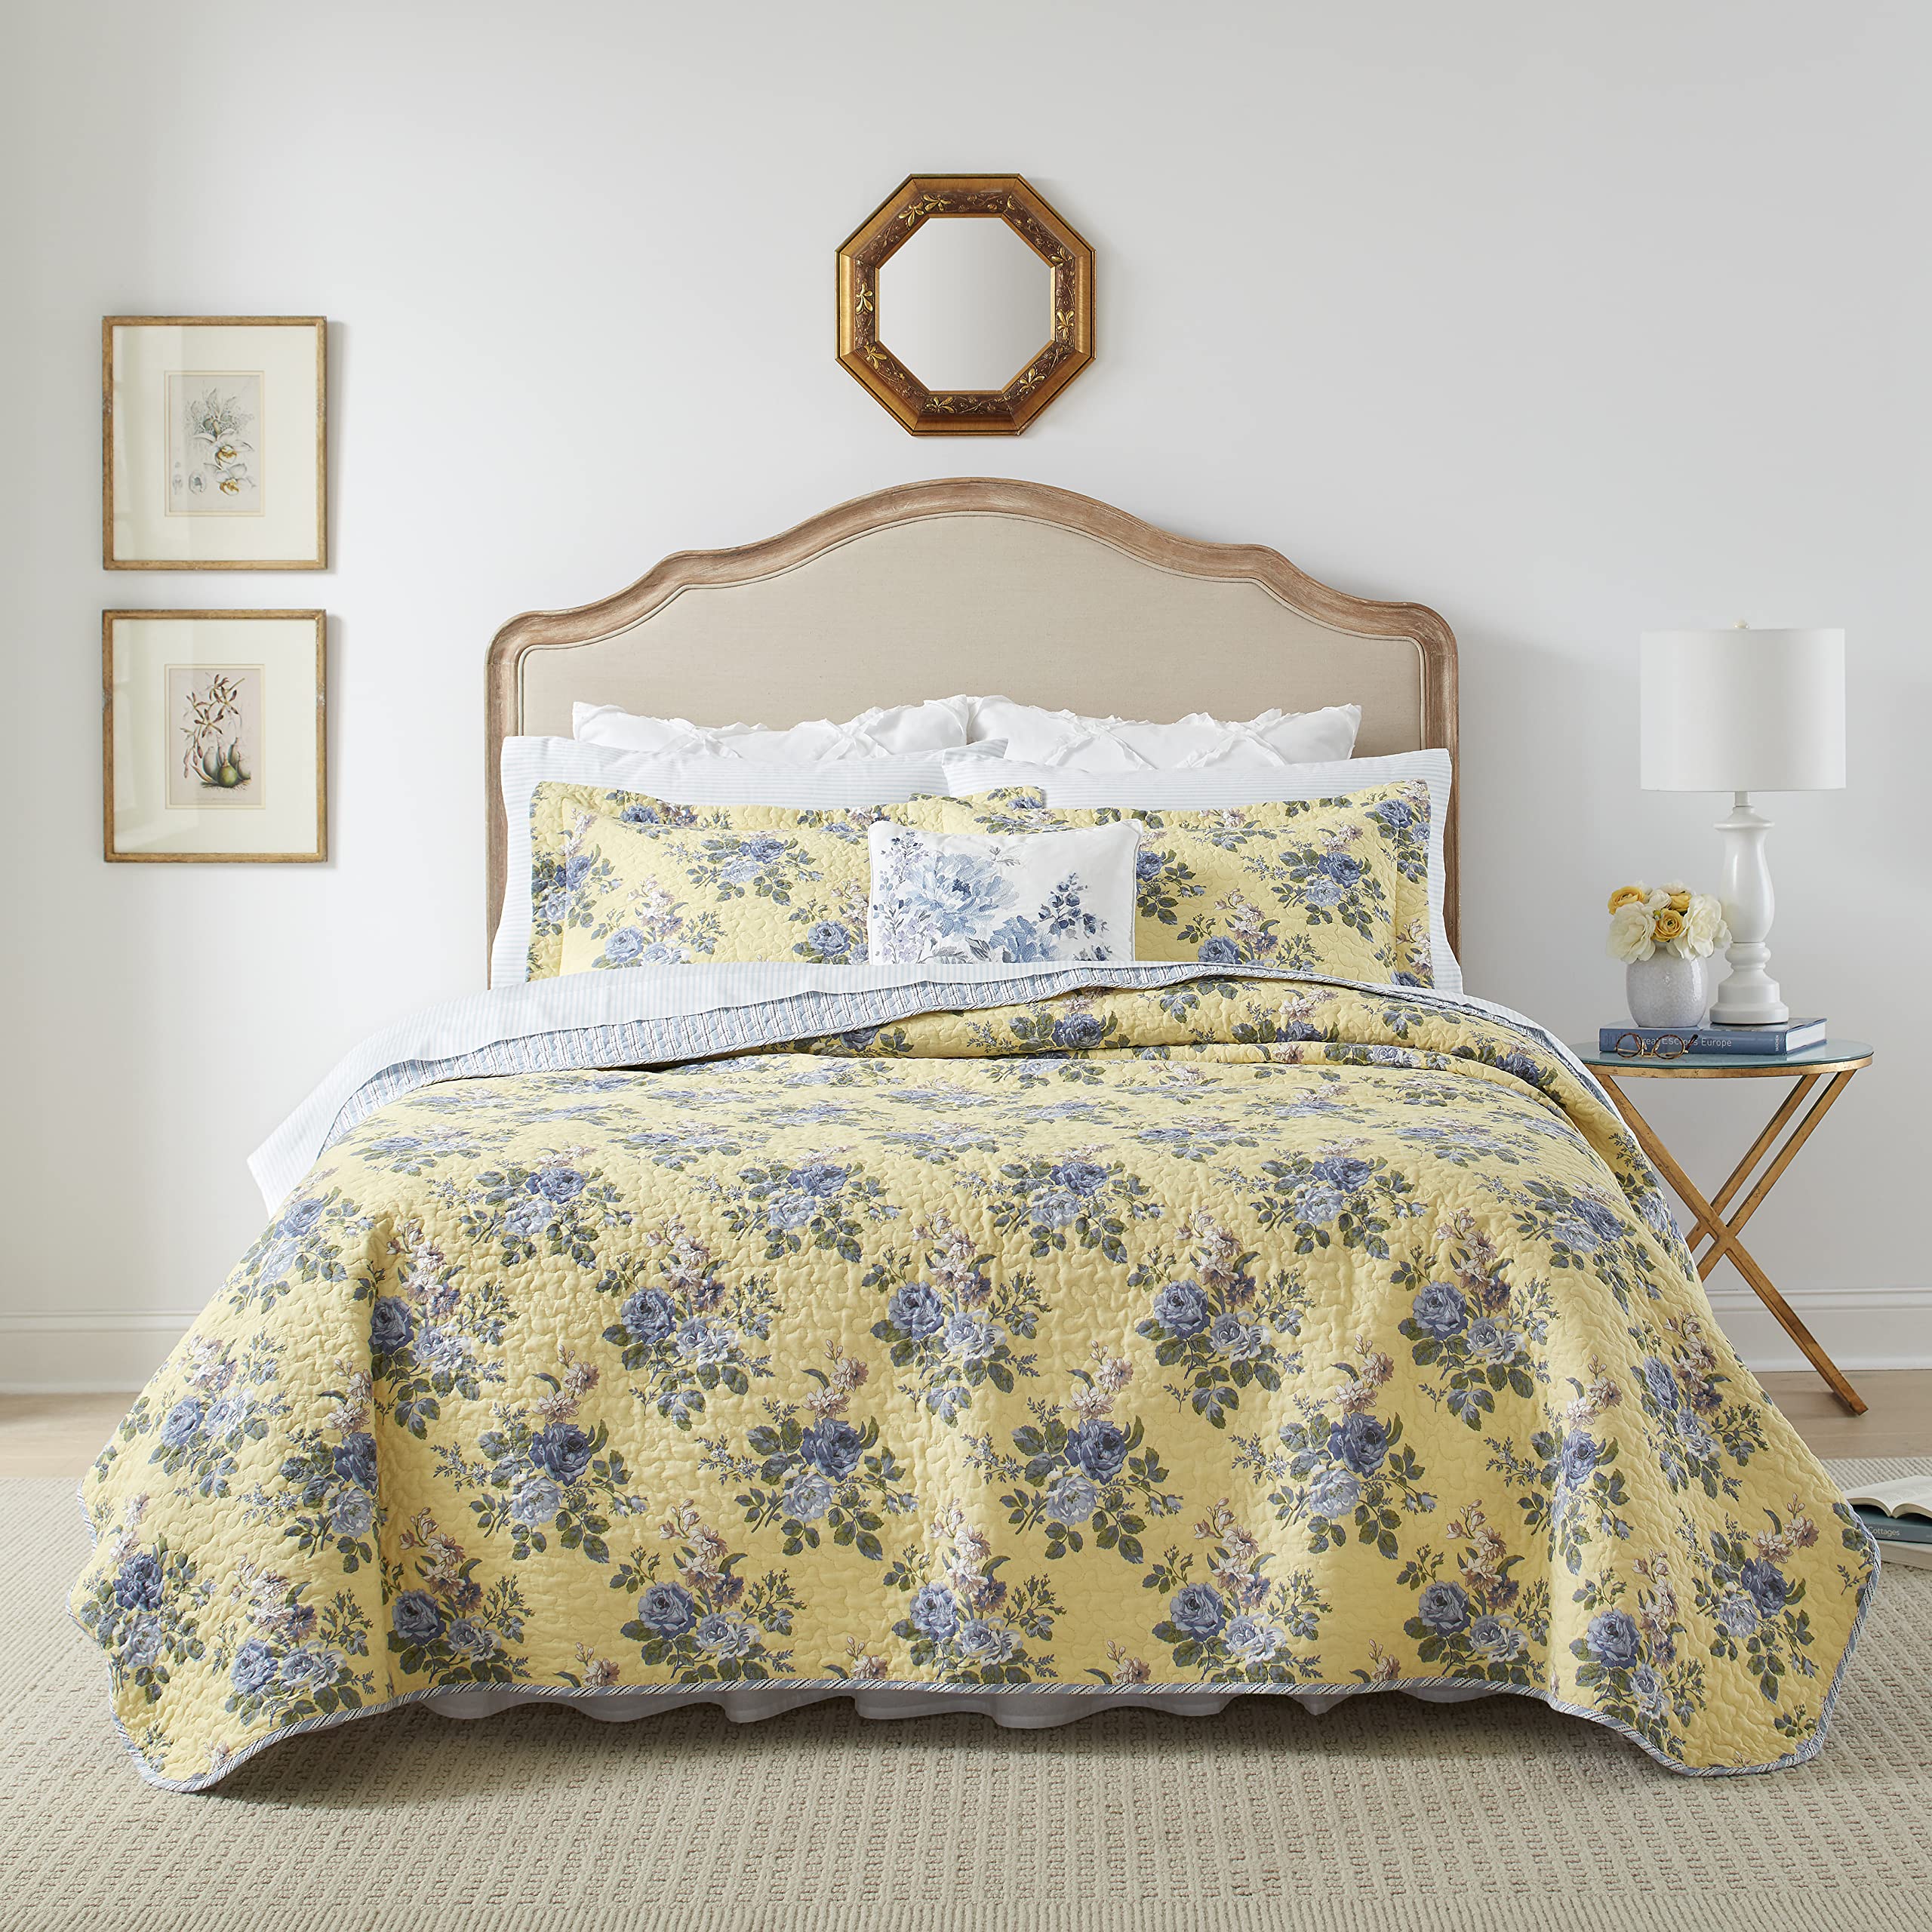 Book Cover Laura Ashley Home Linley Collection Quilt Set-100% Cotton, Reversible, Lightweight & Breathable Bedding, Pre-Washed for Added Softness, King, Pale Yellow